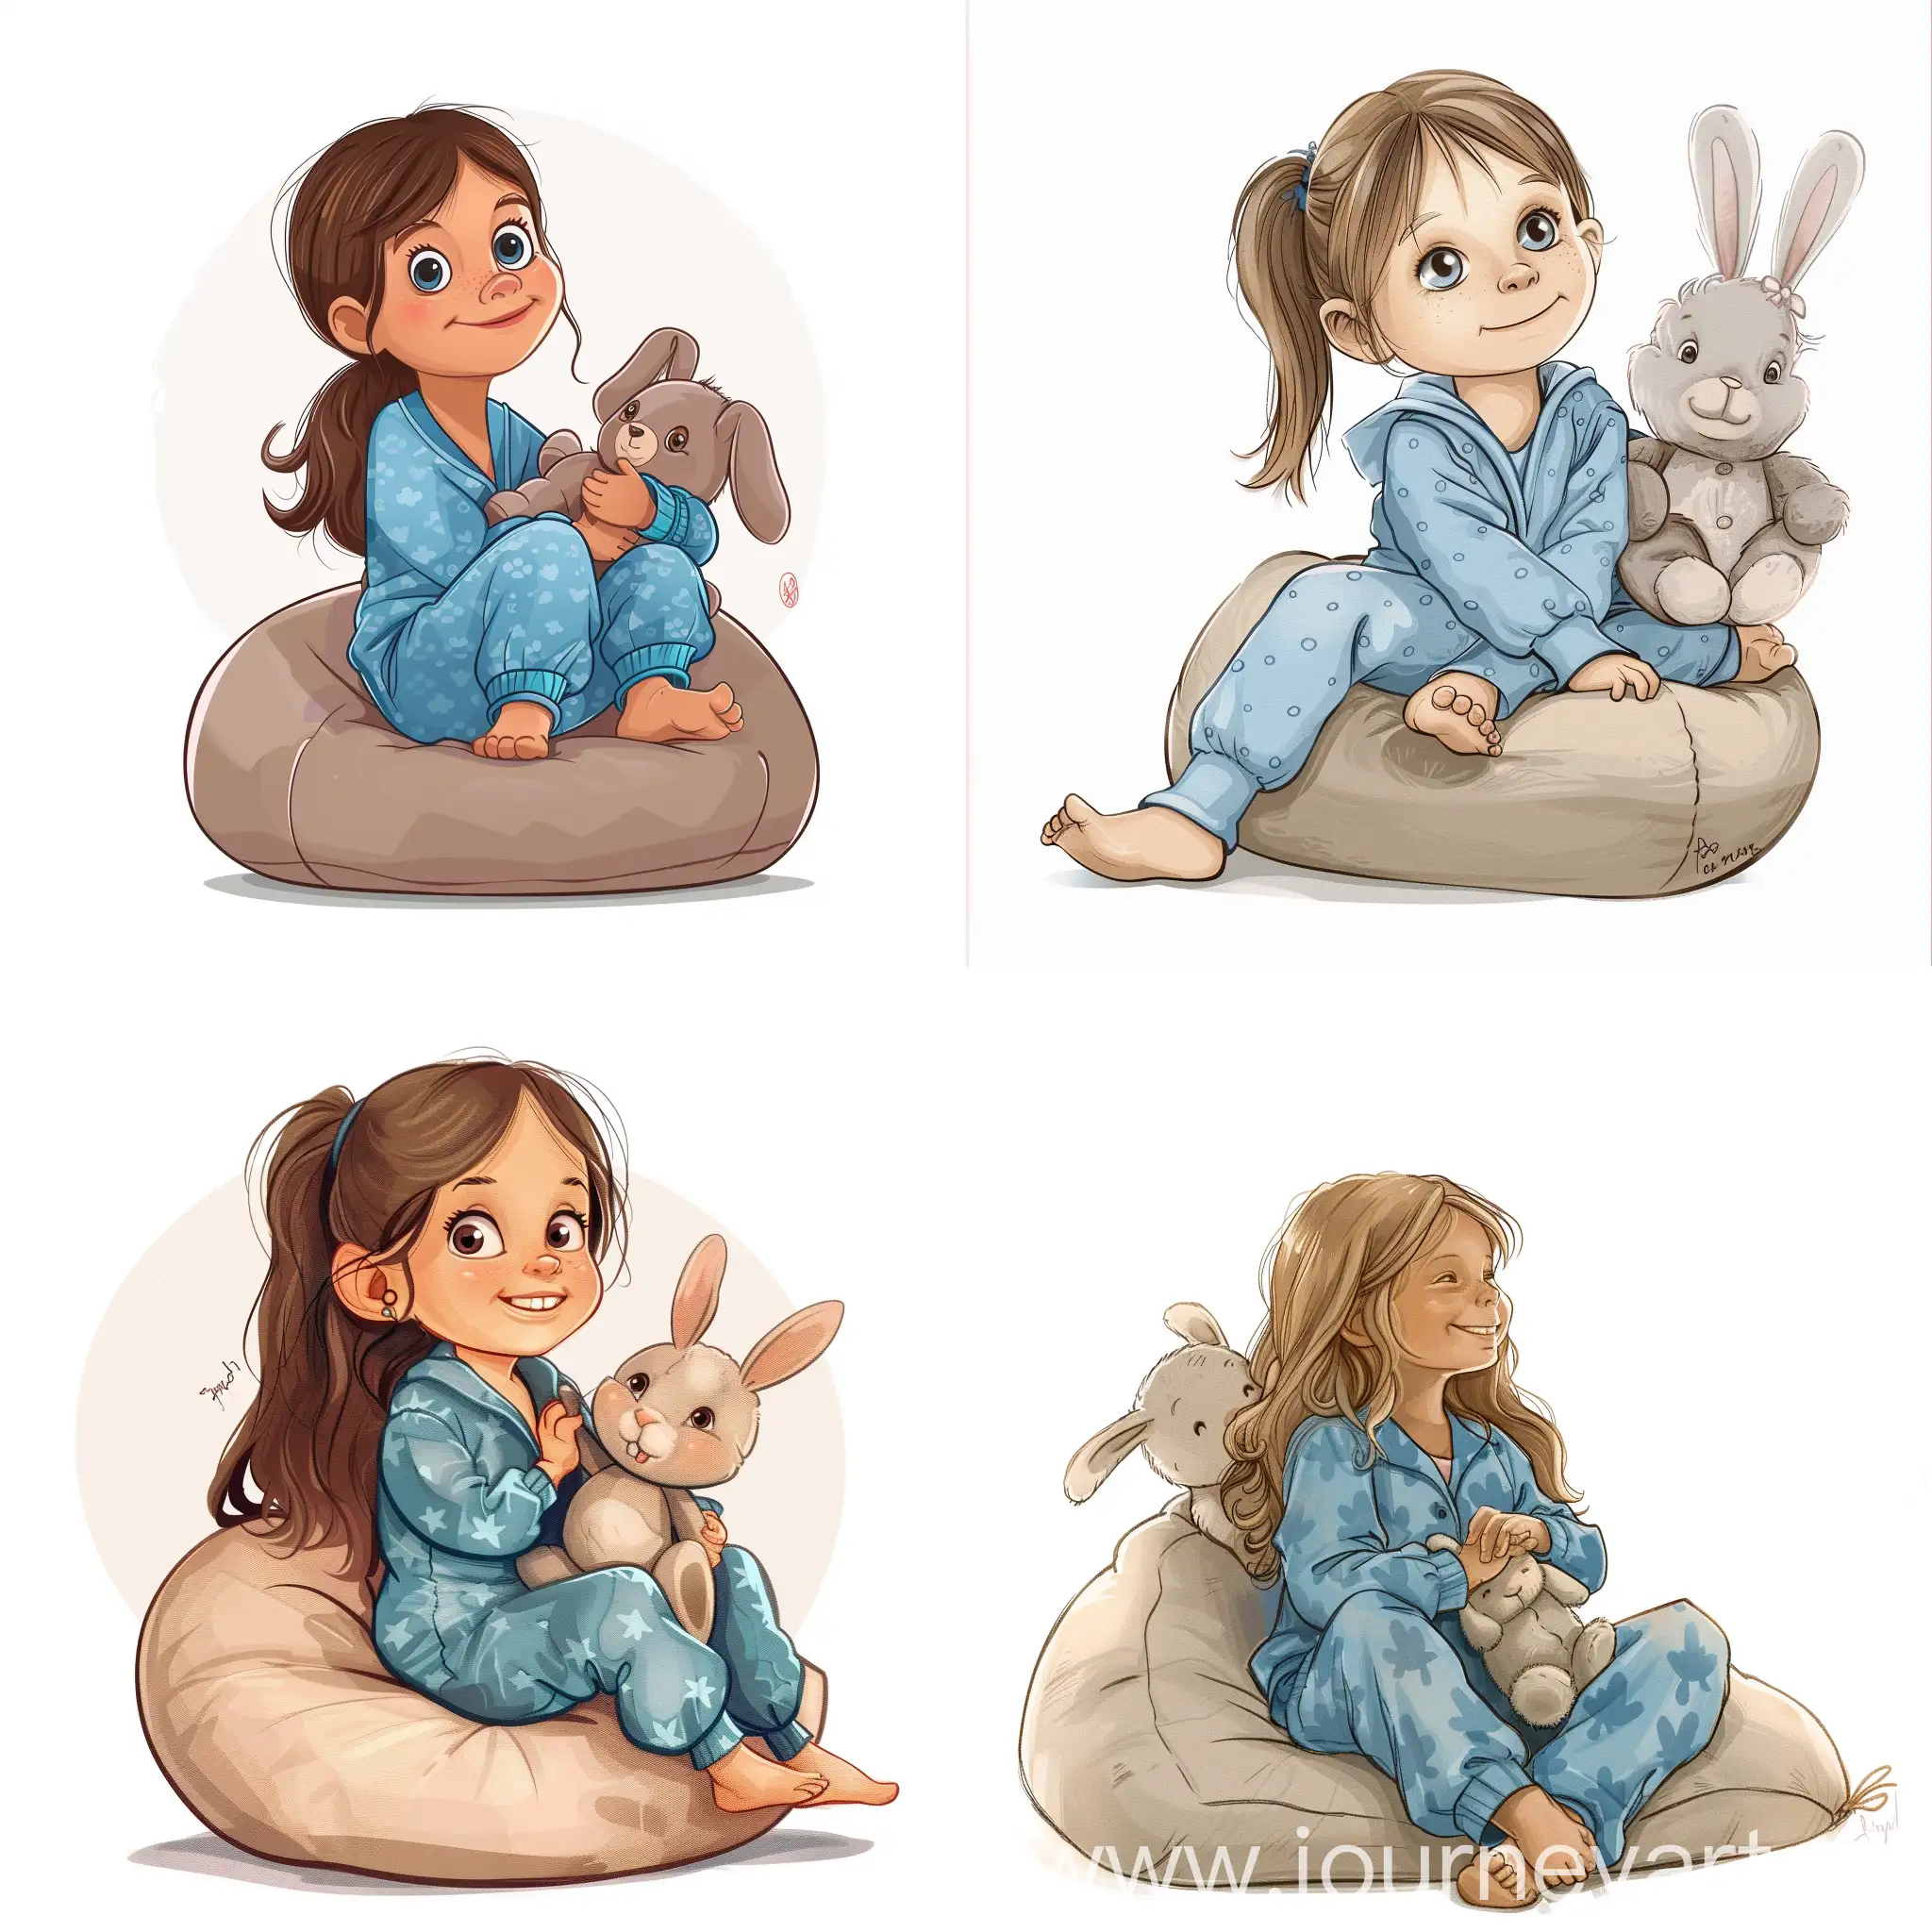 A 5-year-old girl, wearing a blue pajama is sitting on a bean bag while holding a stuffed bunny. Cartoon-style animation children illustration,